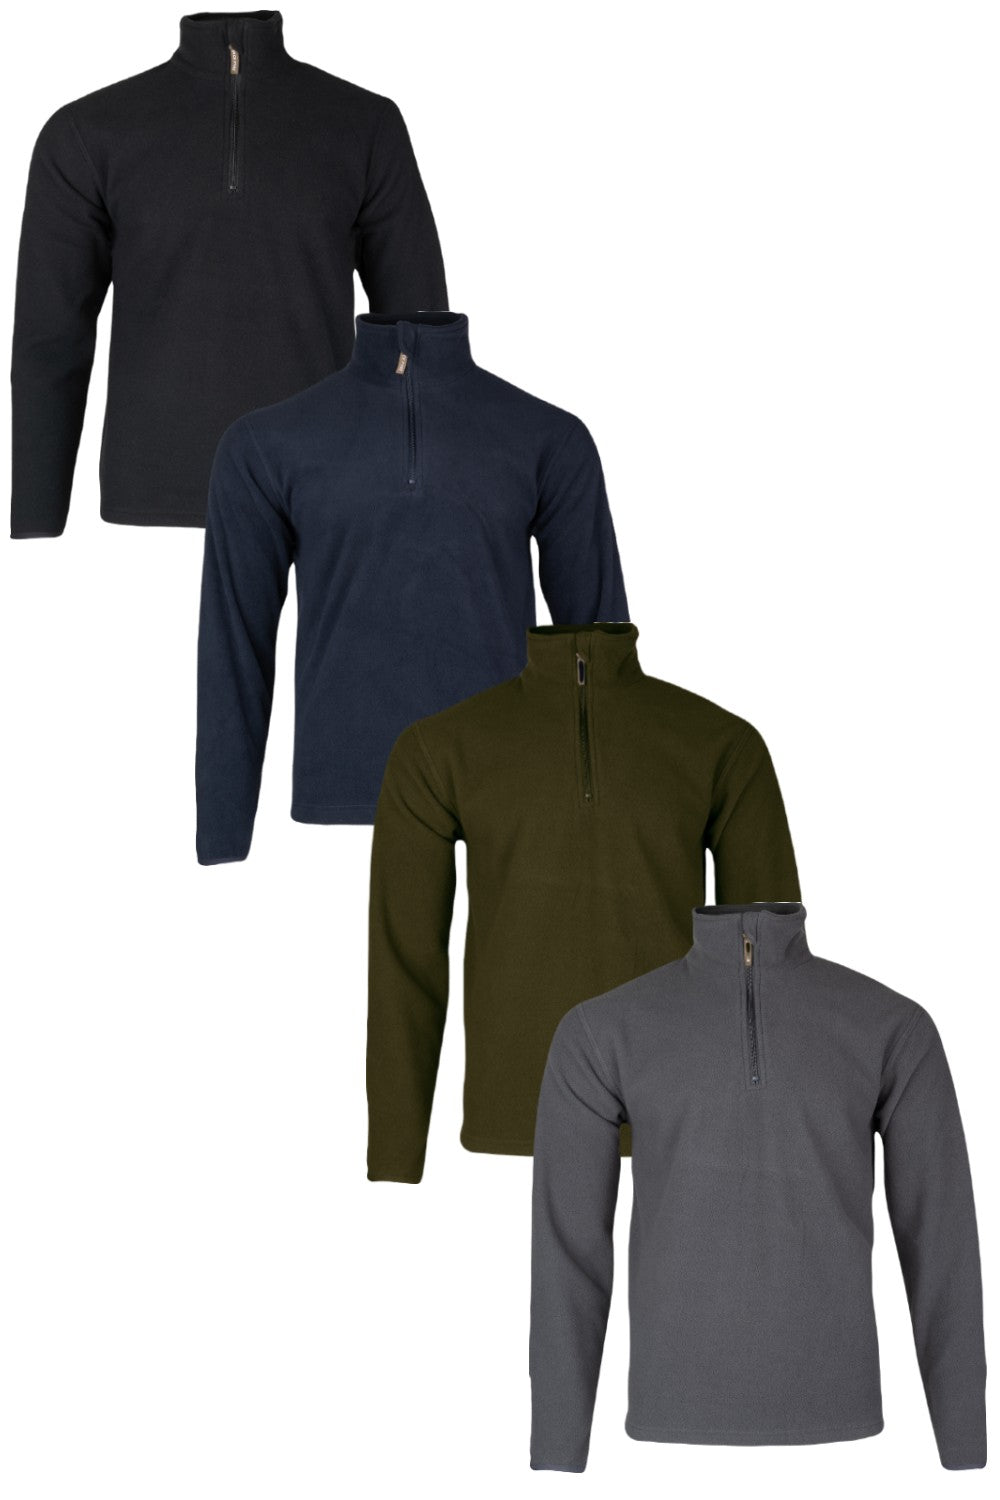 Jack Pyke Country Fleece Top In Anthracite, Charcoal, Dark Olive, Navy 